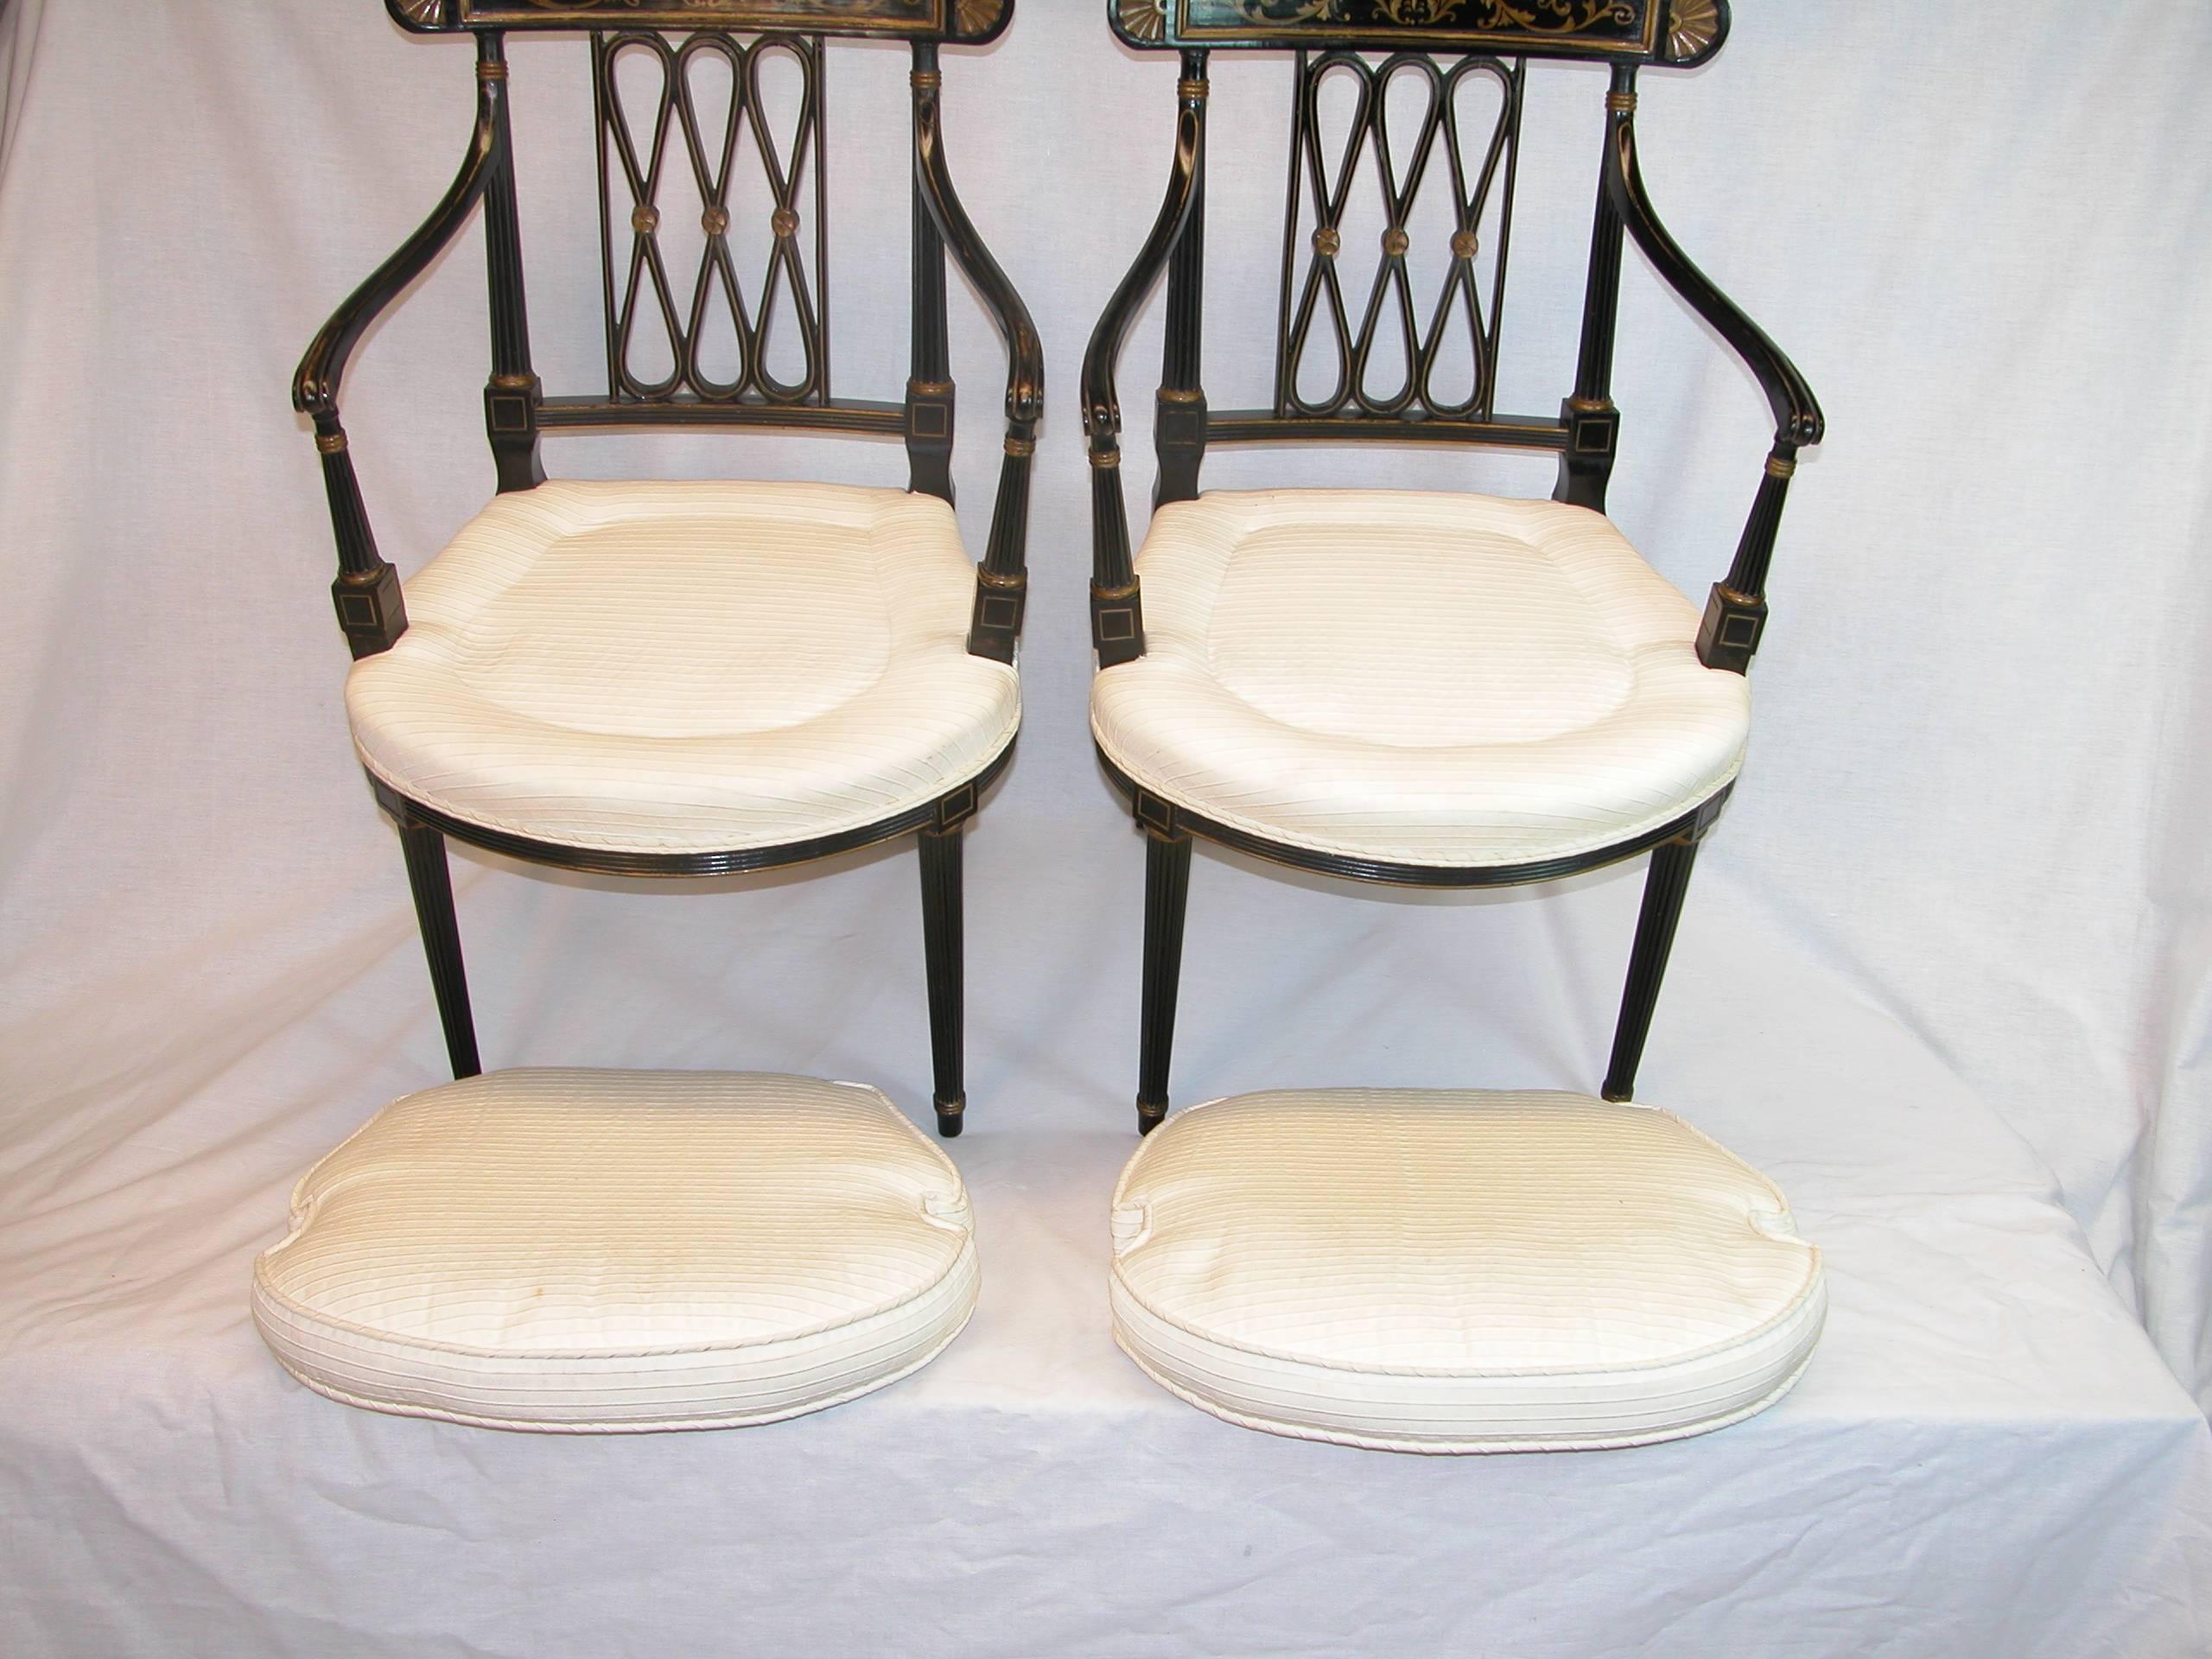 Pair Black Lacquered & Gold Decorated Diamond Back Regency Open Armchairs C 1850 For Sale 1